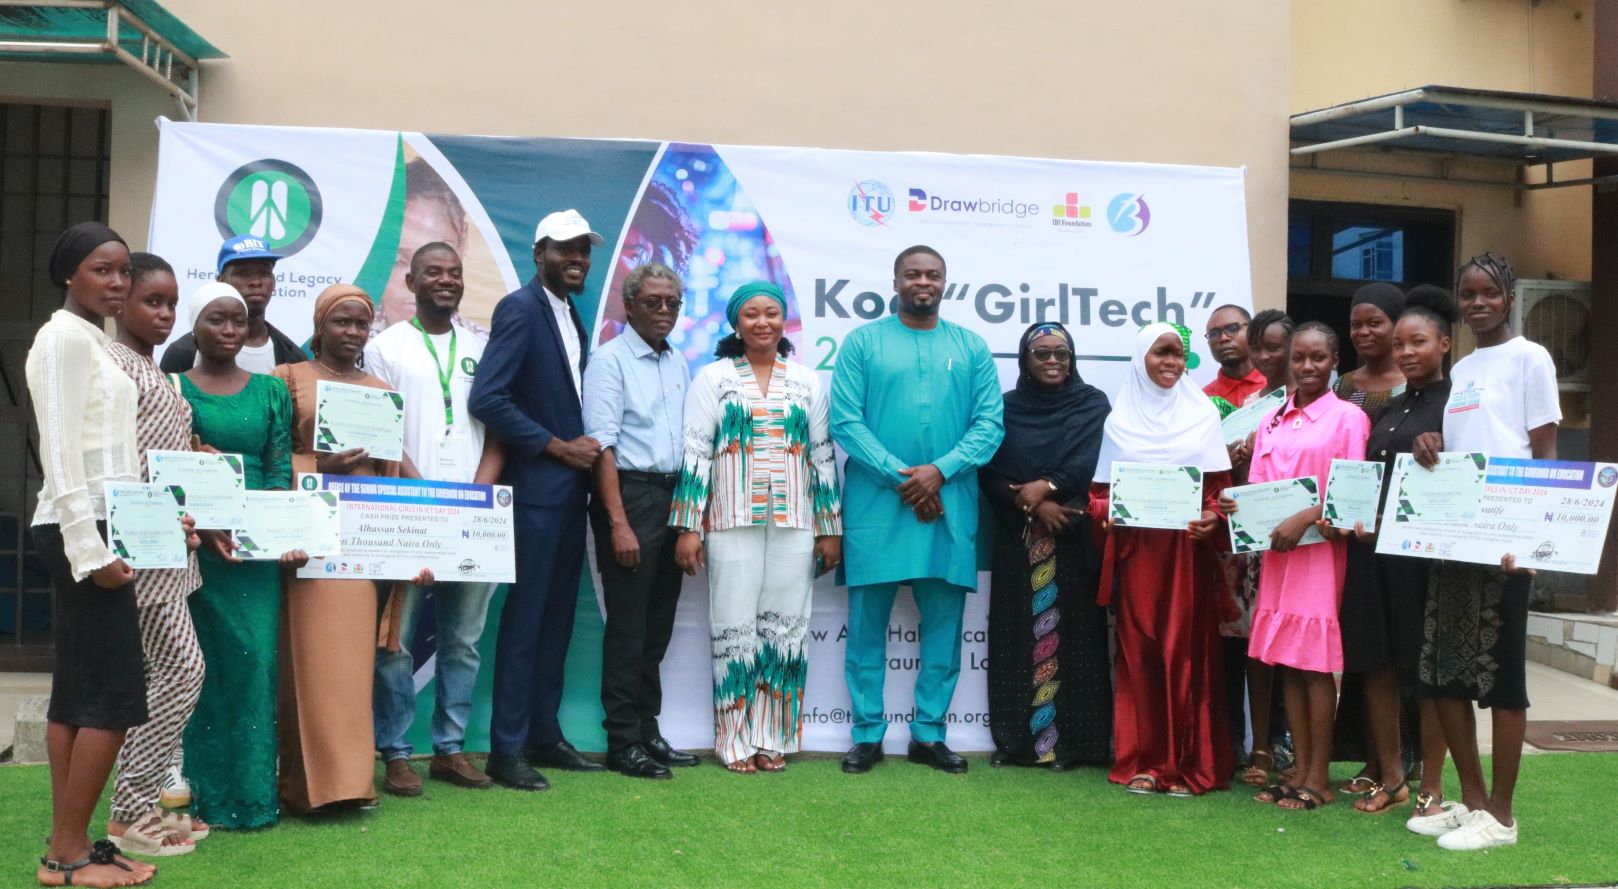 The founder of Heritage and Legacy Foundation, Hassan Abdul along with the Senior Special Assistant to the Kogi state Governor on Education, Hon. Nana Hauwa Kazeem with some of the graduating girls and prize winners from the ICT skills training.